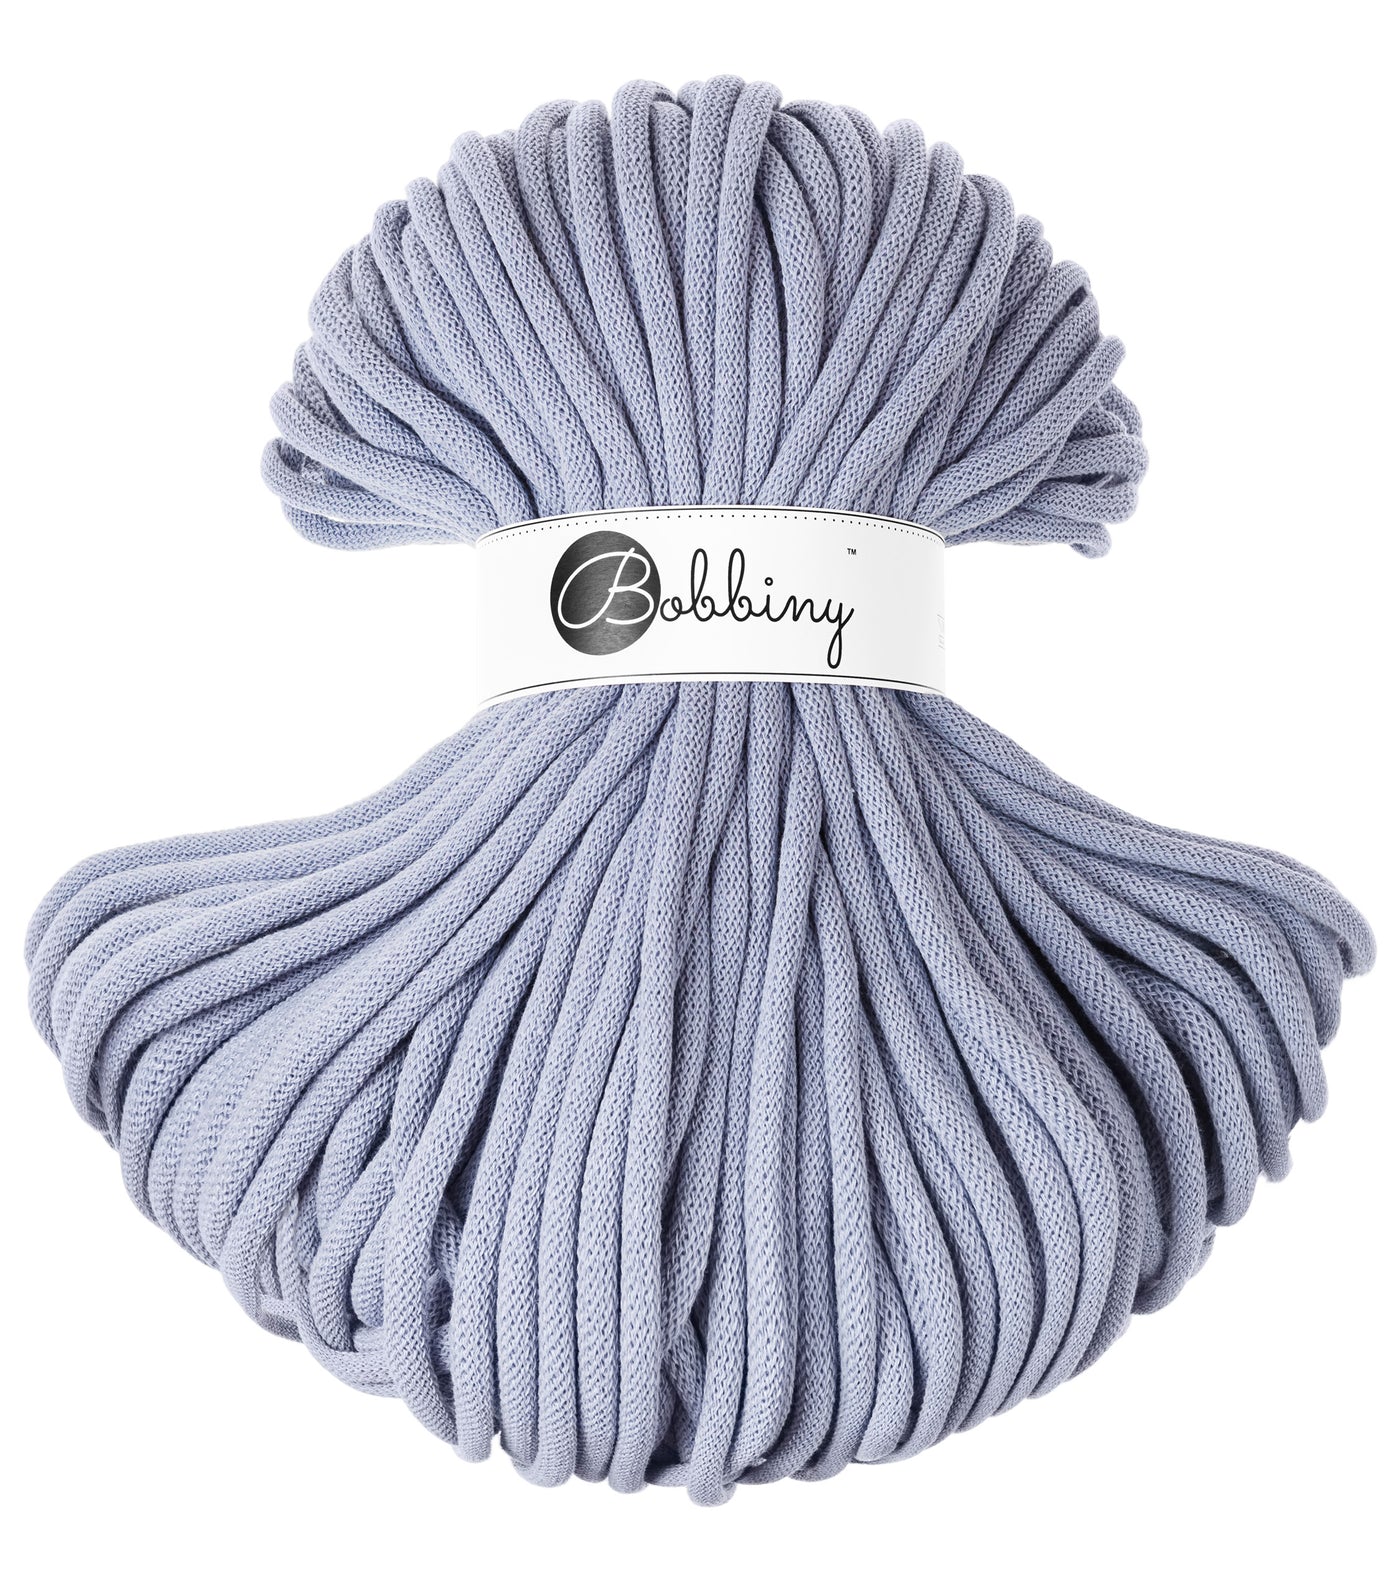 These gorgeous Bobbiny cords are made in Poland from 100% recycled cottons and are non toxic and certified safe for children.  9mm Diameter  Length 100m  Recommended for use with 14-16mm crochet hooks or knitting needles.  Perfect for use with Macrame, Crochet or Knitting.